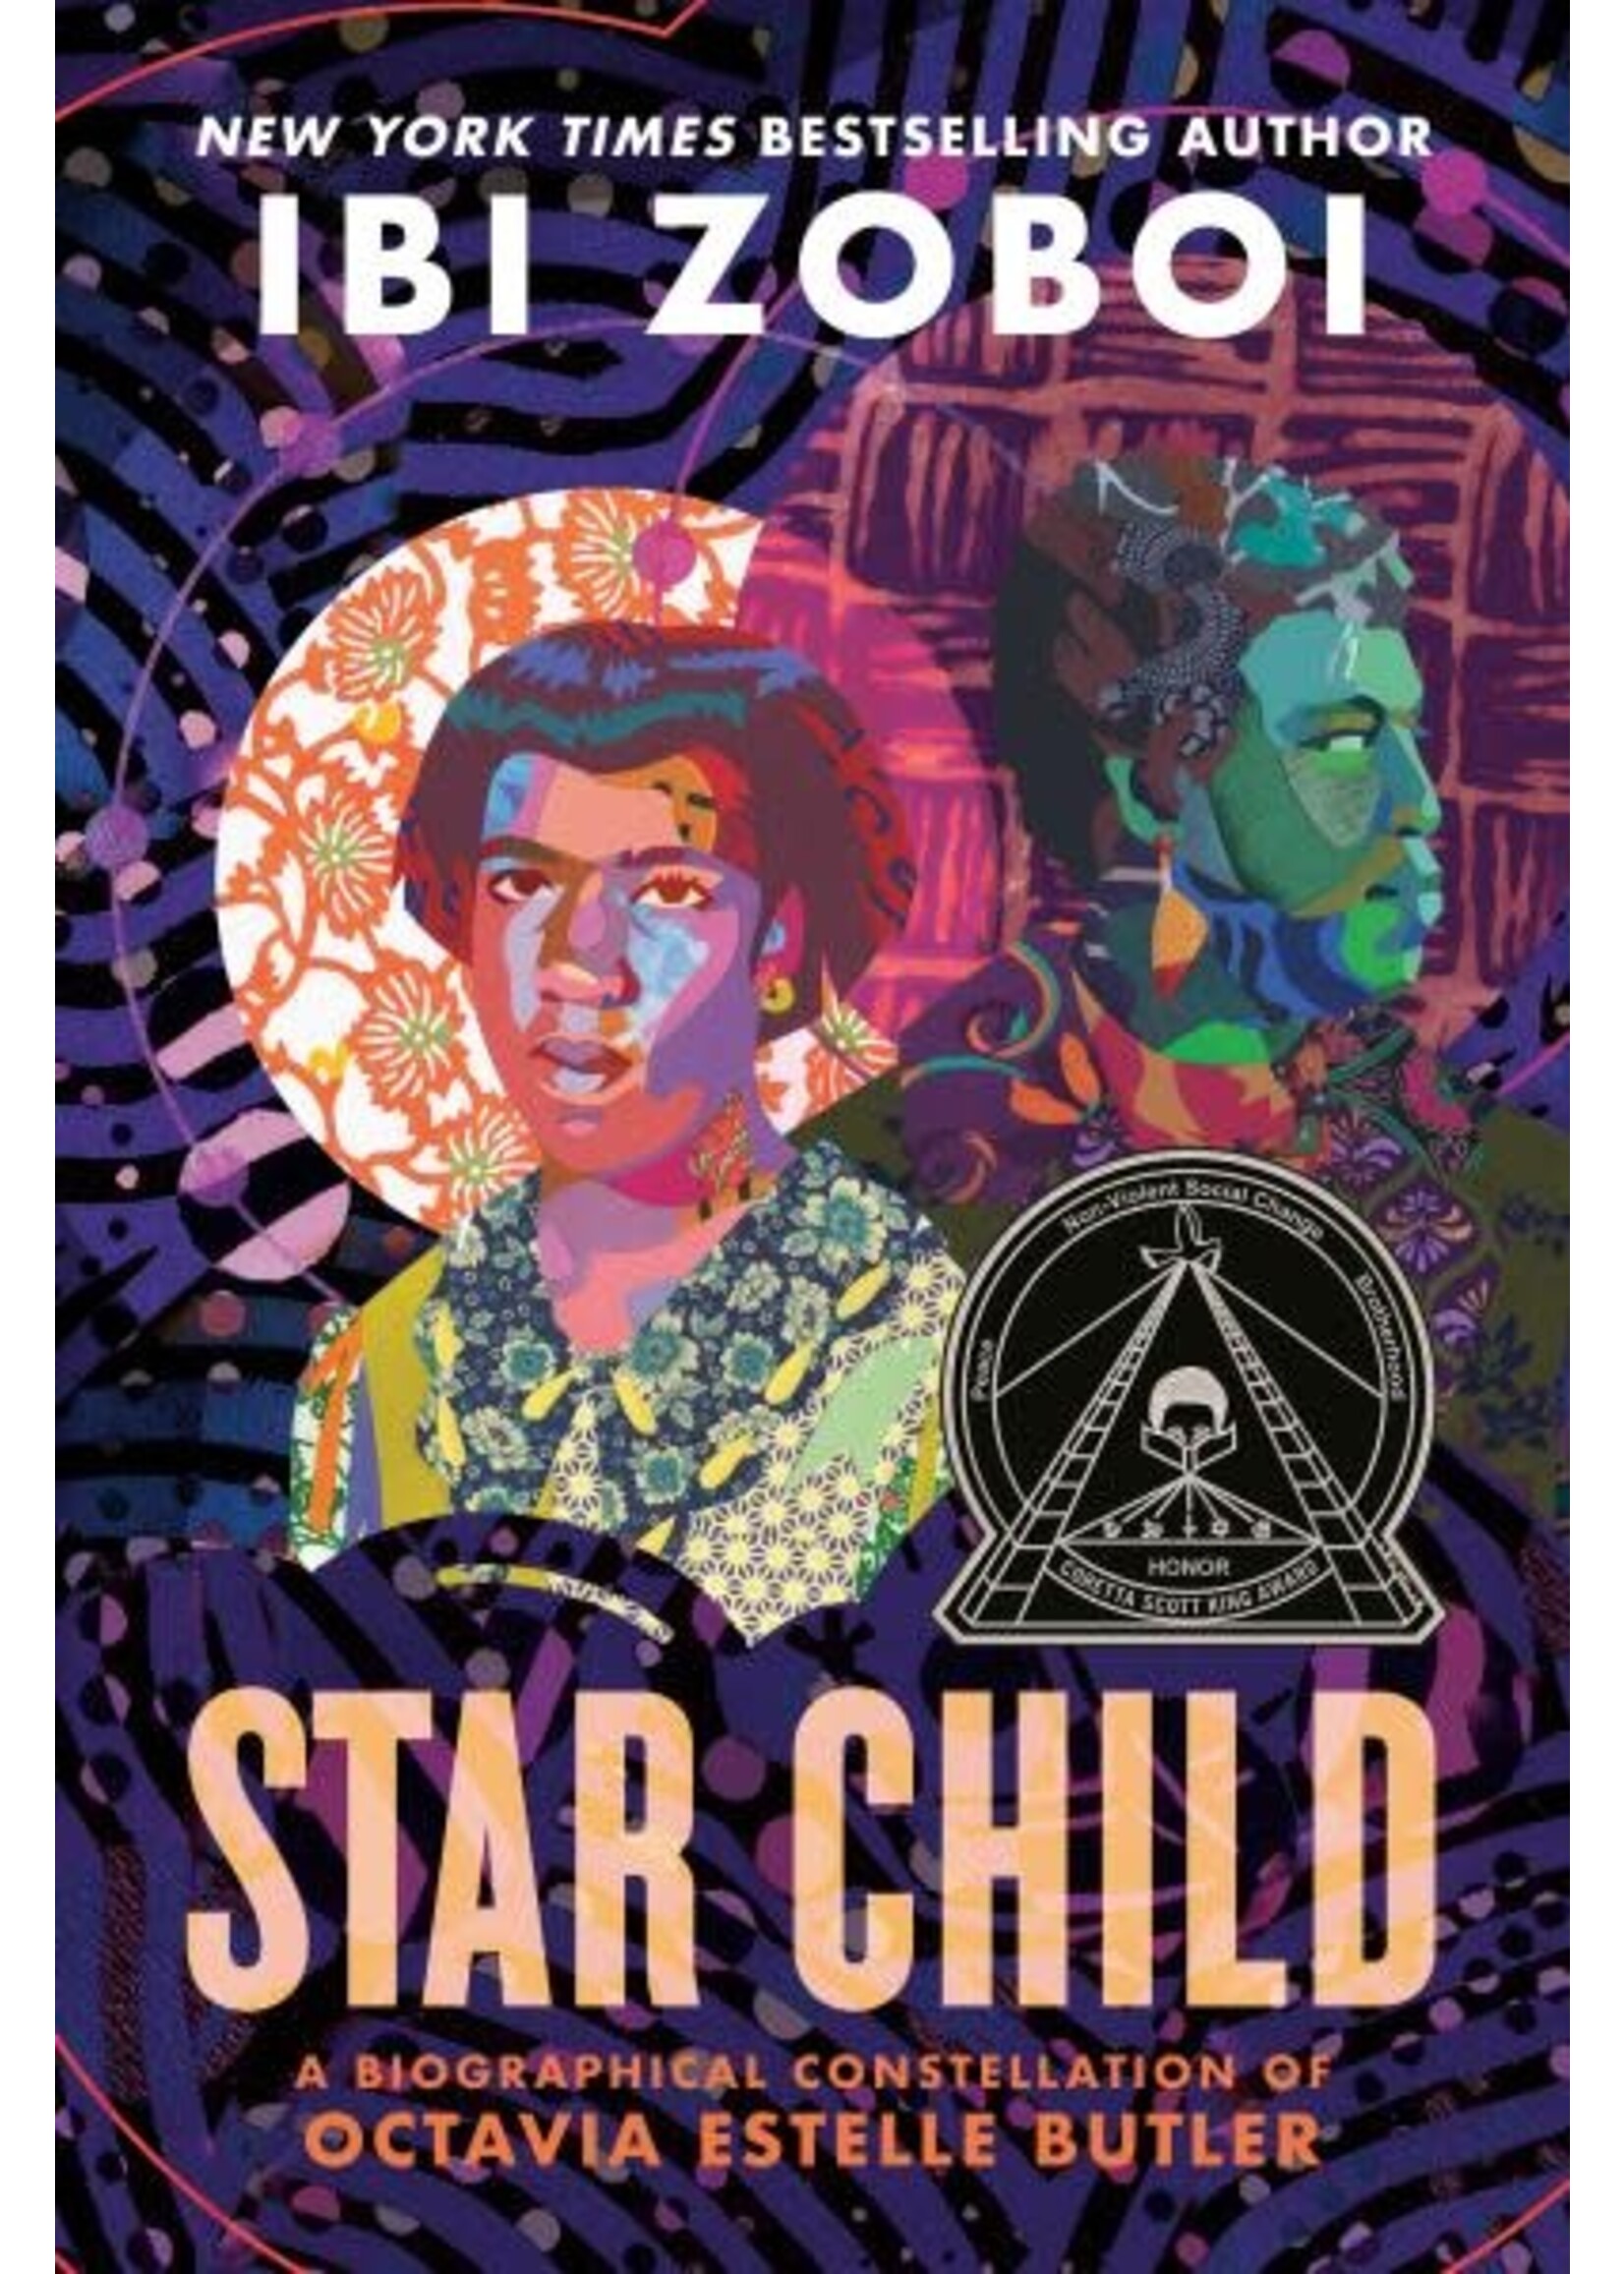 Star Child: A Biographical Constellation of Octavia Estelle Butler by Ibi Zoboi